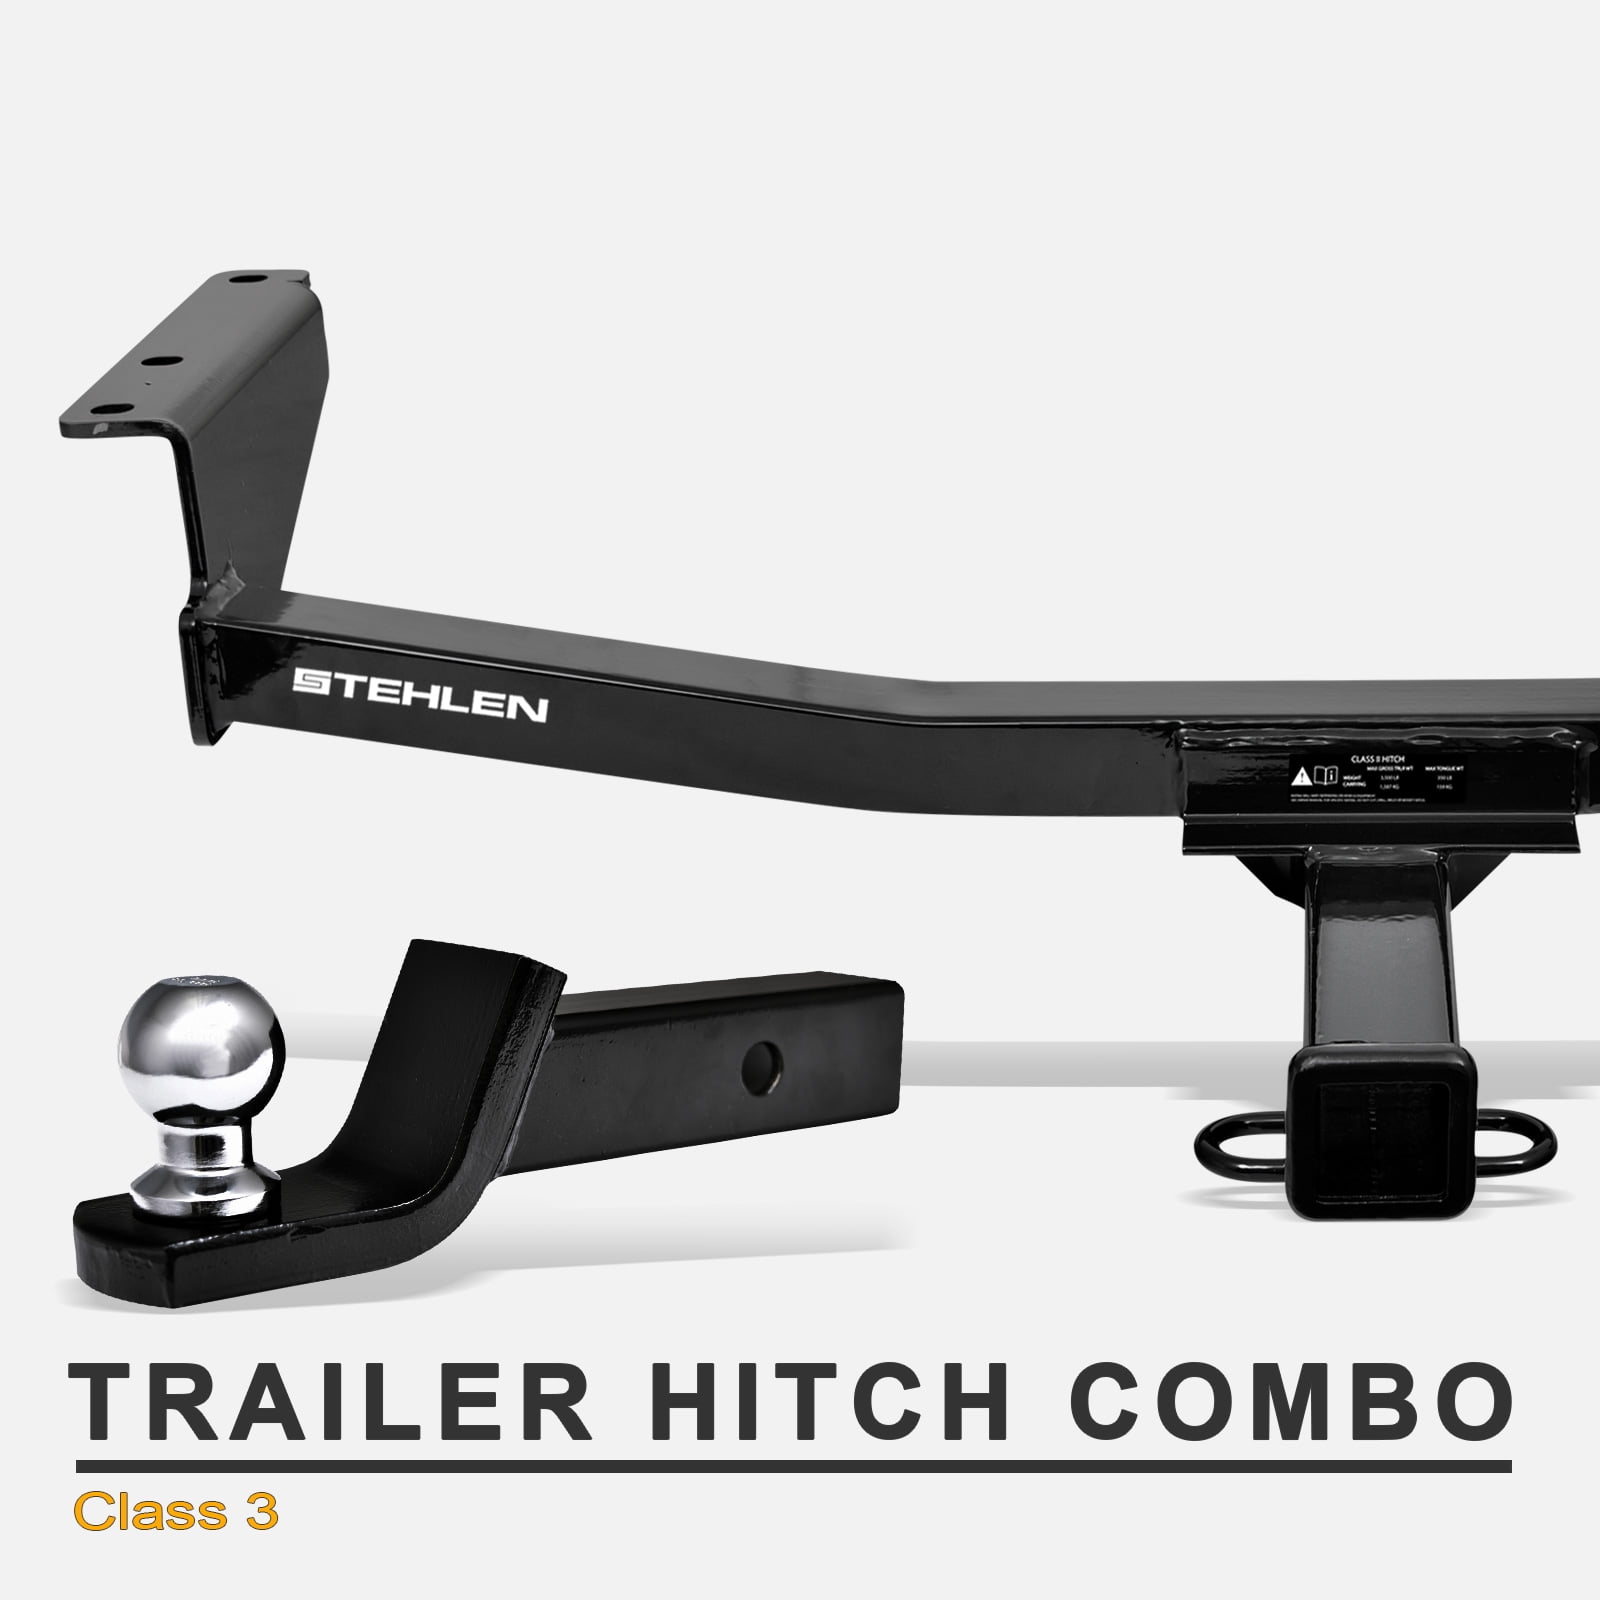 Stehlen 733469492337 Class 3 Trailer Hitch Receiver 2" with Loaded Ball 2008 Nissan Rogue Trailer Hitch